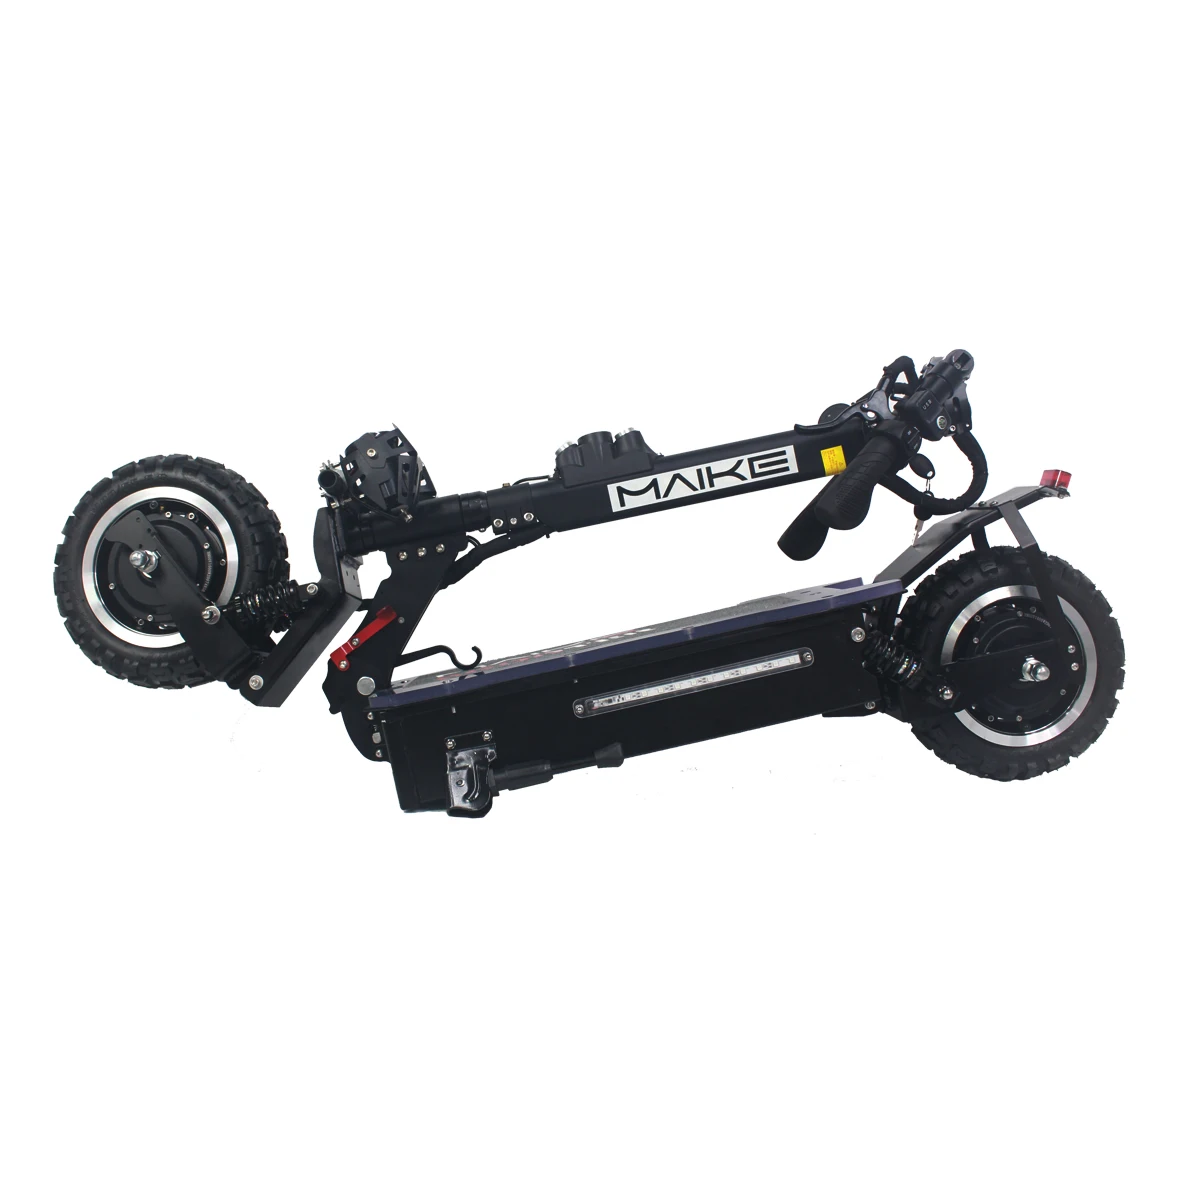 

High Quality Competitive Price Maike kk4s 60v 3200w dual motor 85km/h high speed off road adult electric kick scooters